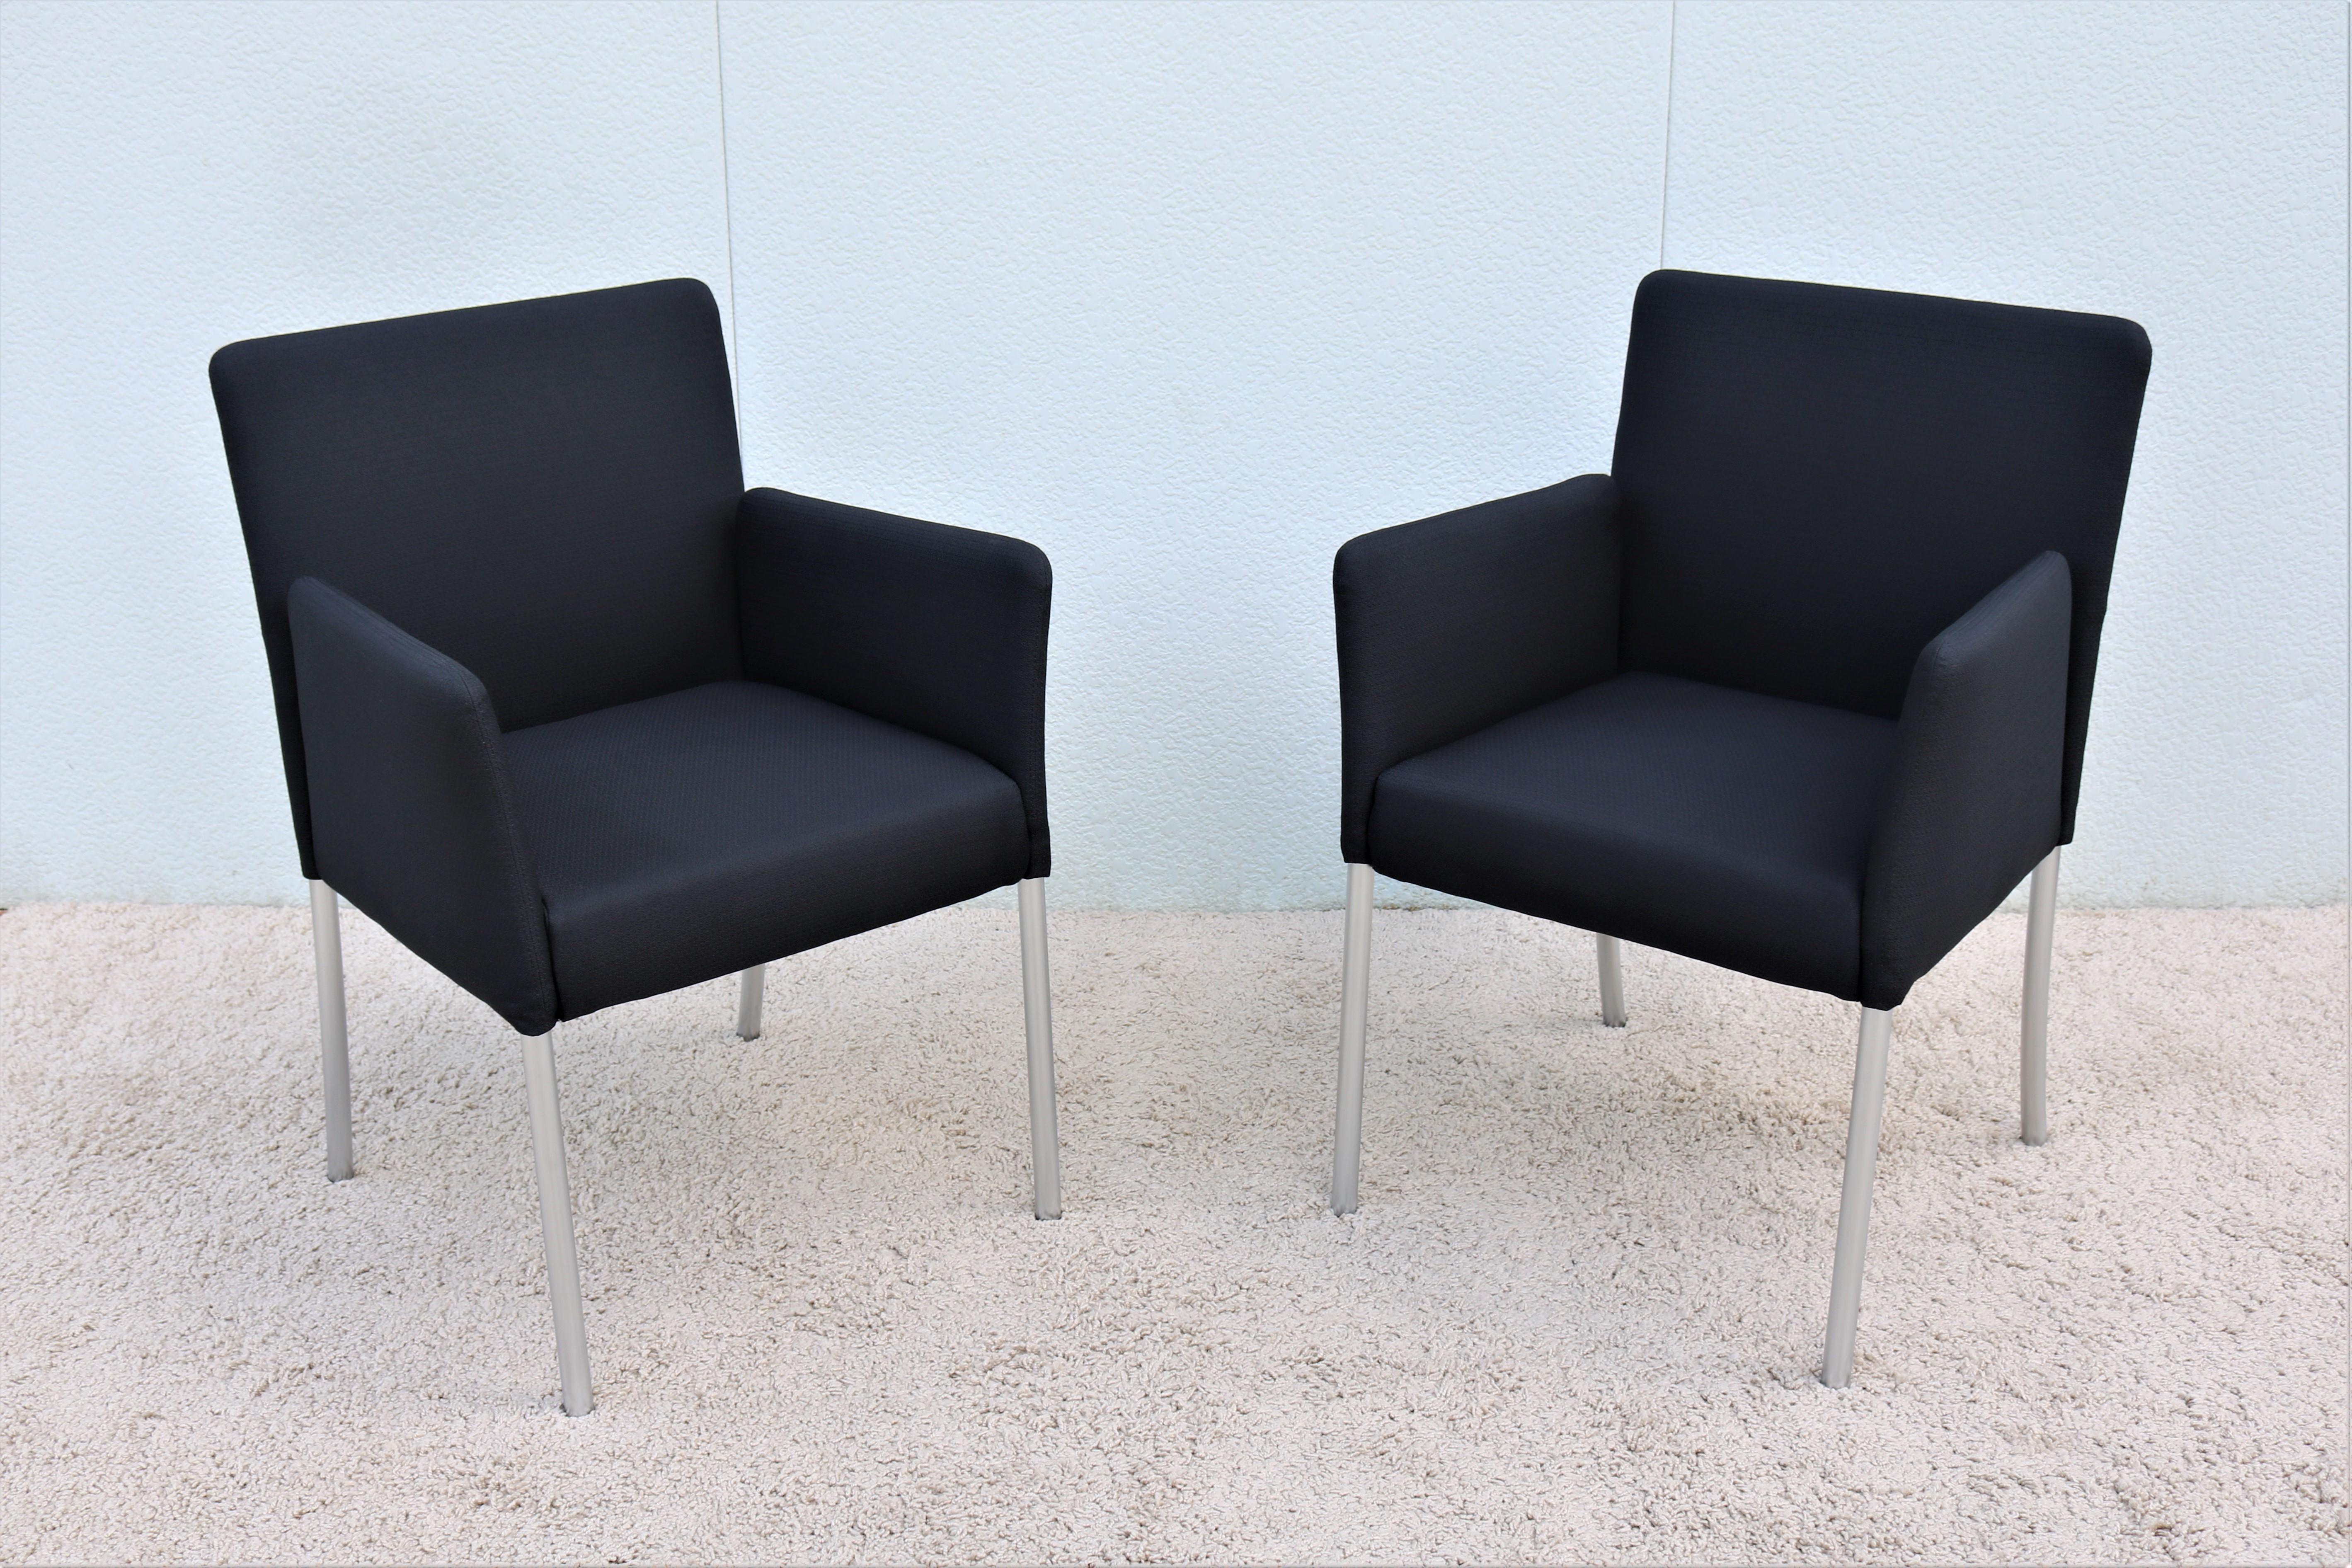 This elegant pair of switch armchairs by Coalesse and Steelcase features high quality materials and a contemporary design, can be used as dining chairs or guest chairs, will brings modern and comfortable seating to your home or